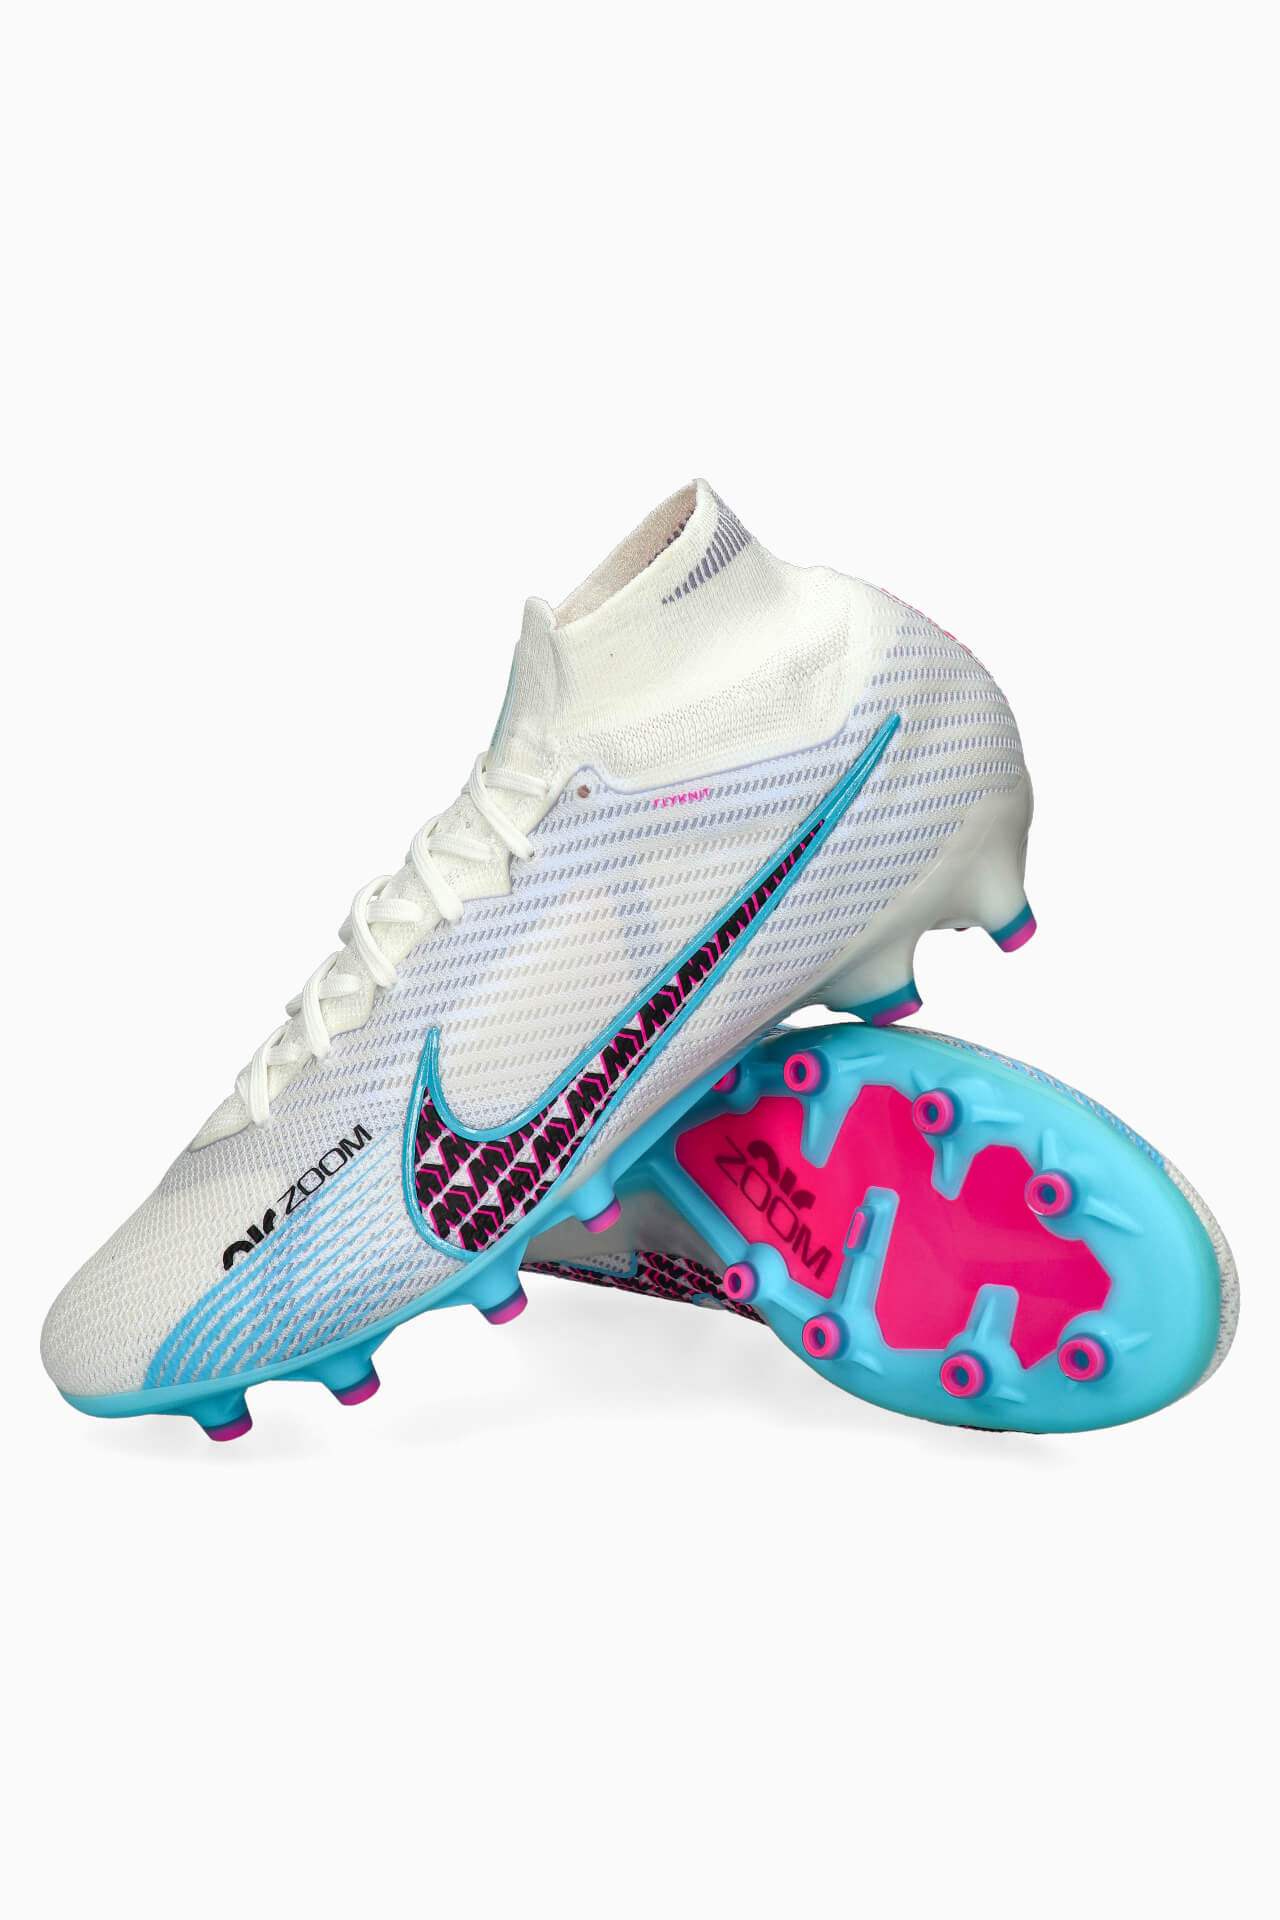 Cleats Nike Zoom Mercurial Superfly 9 Elite AG-PRO | R-GOL.com - boots & equipment